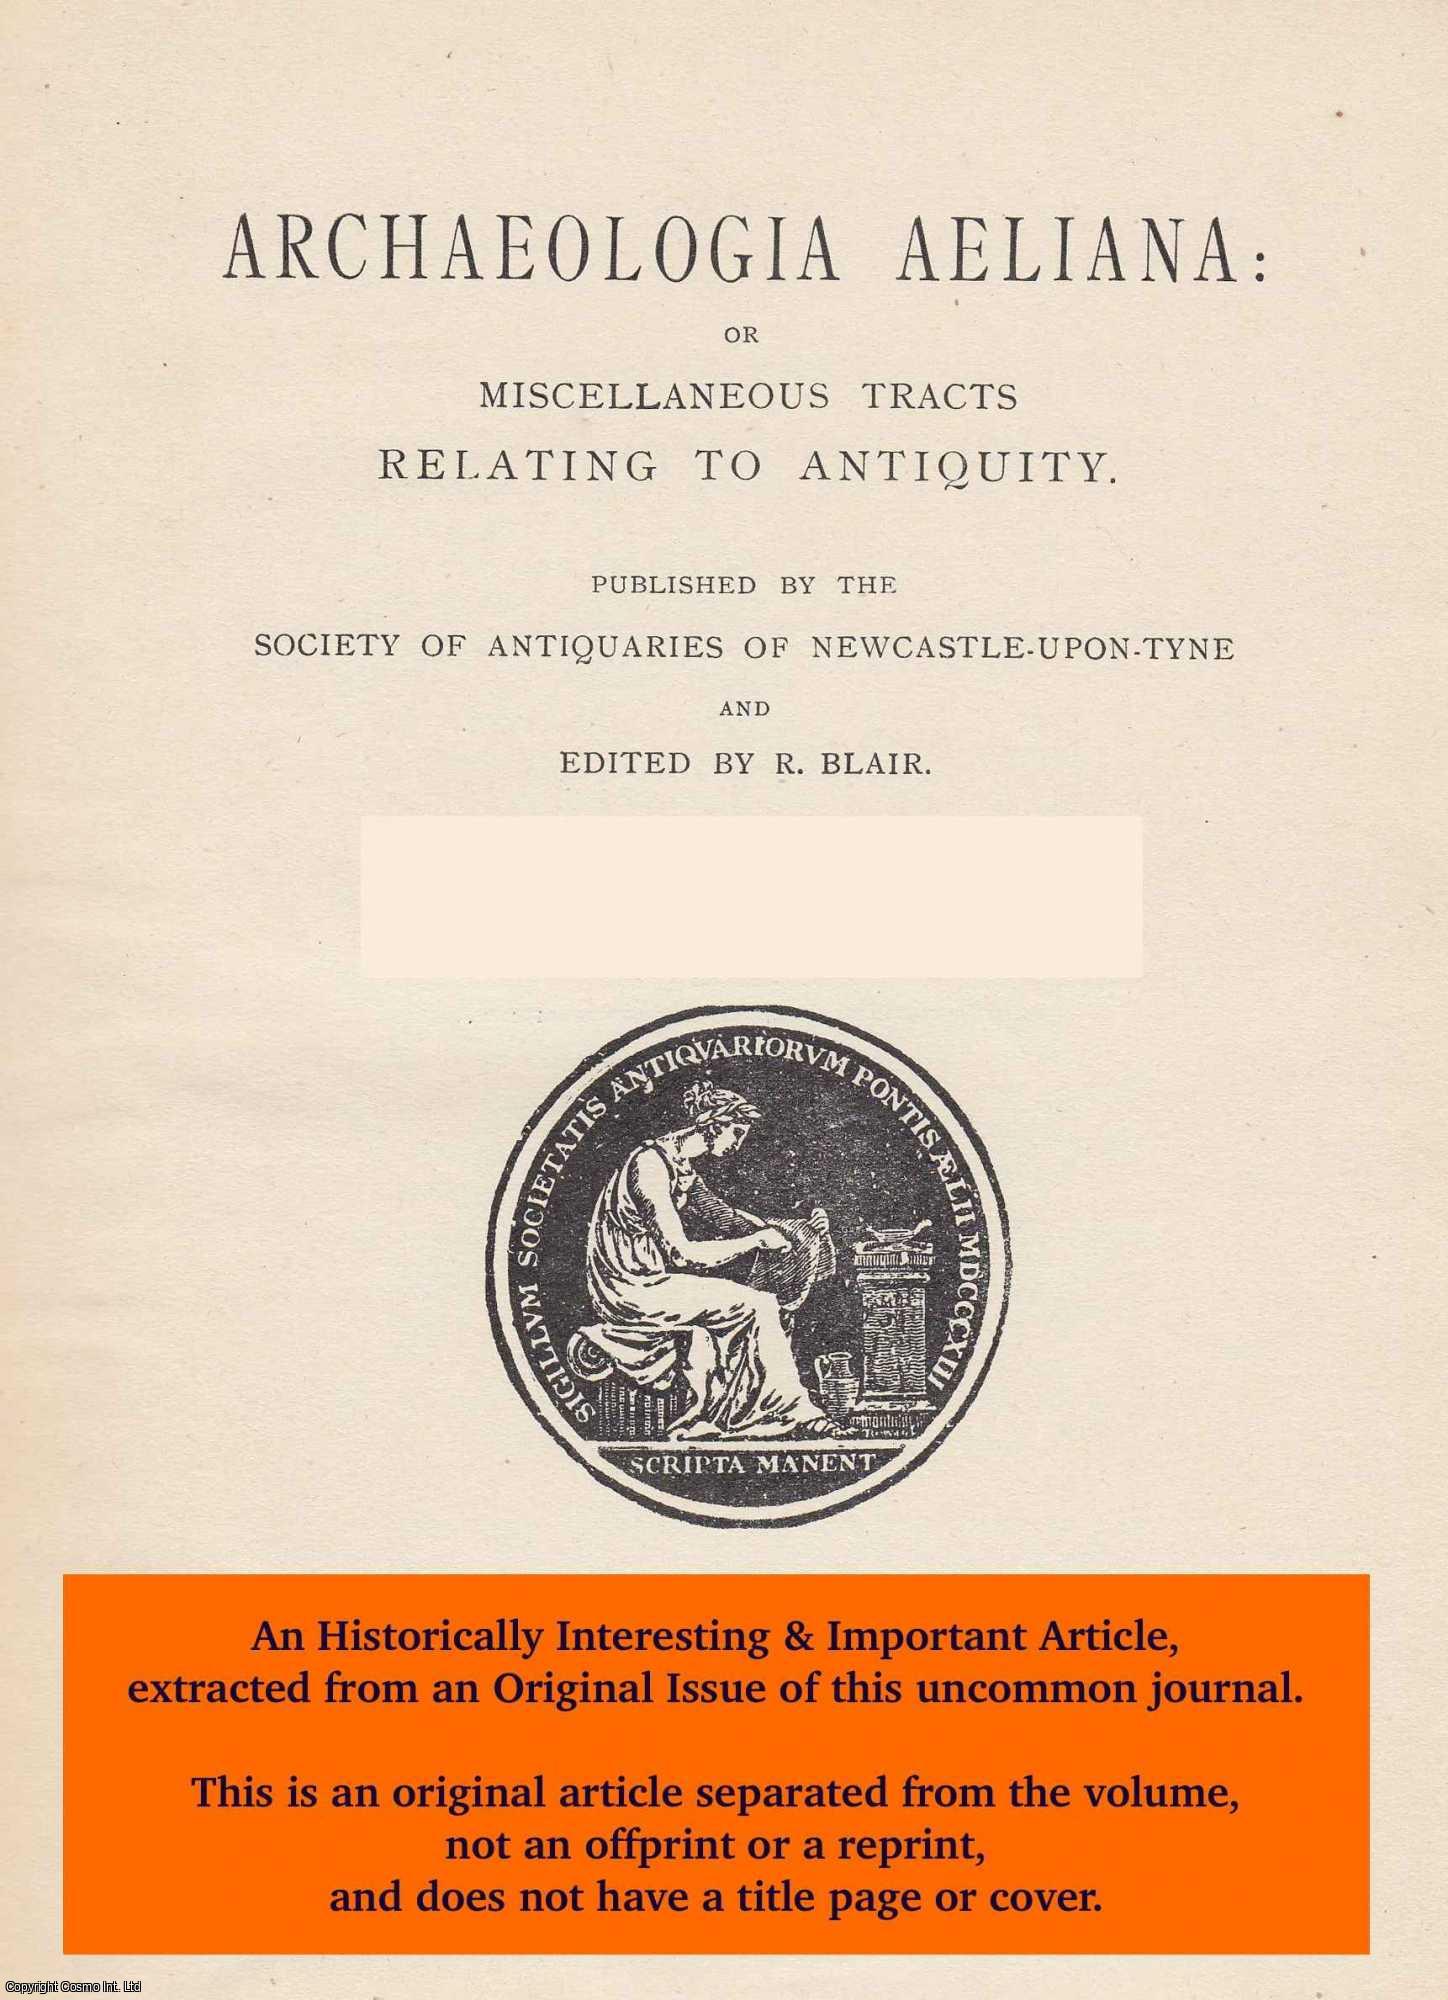 Edward Hughes - Some Clavering Correspondence. An original article from The Archaeologia Aeliana: or Miscellaneous Tracts Relating to Antiquity, 1956.